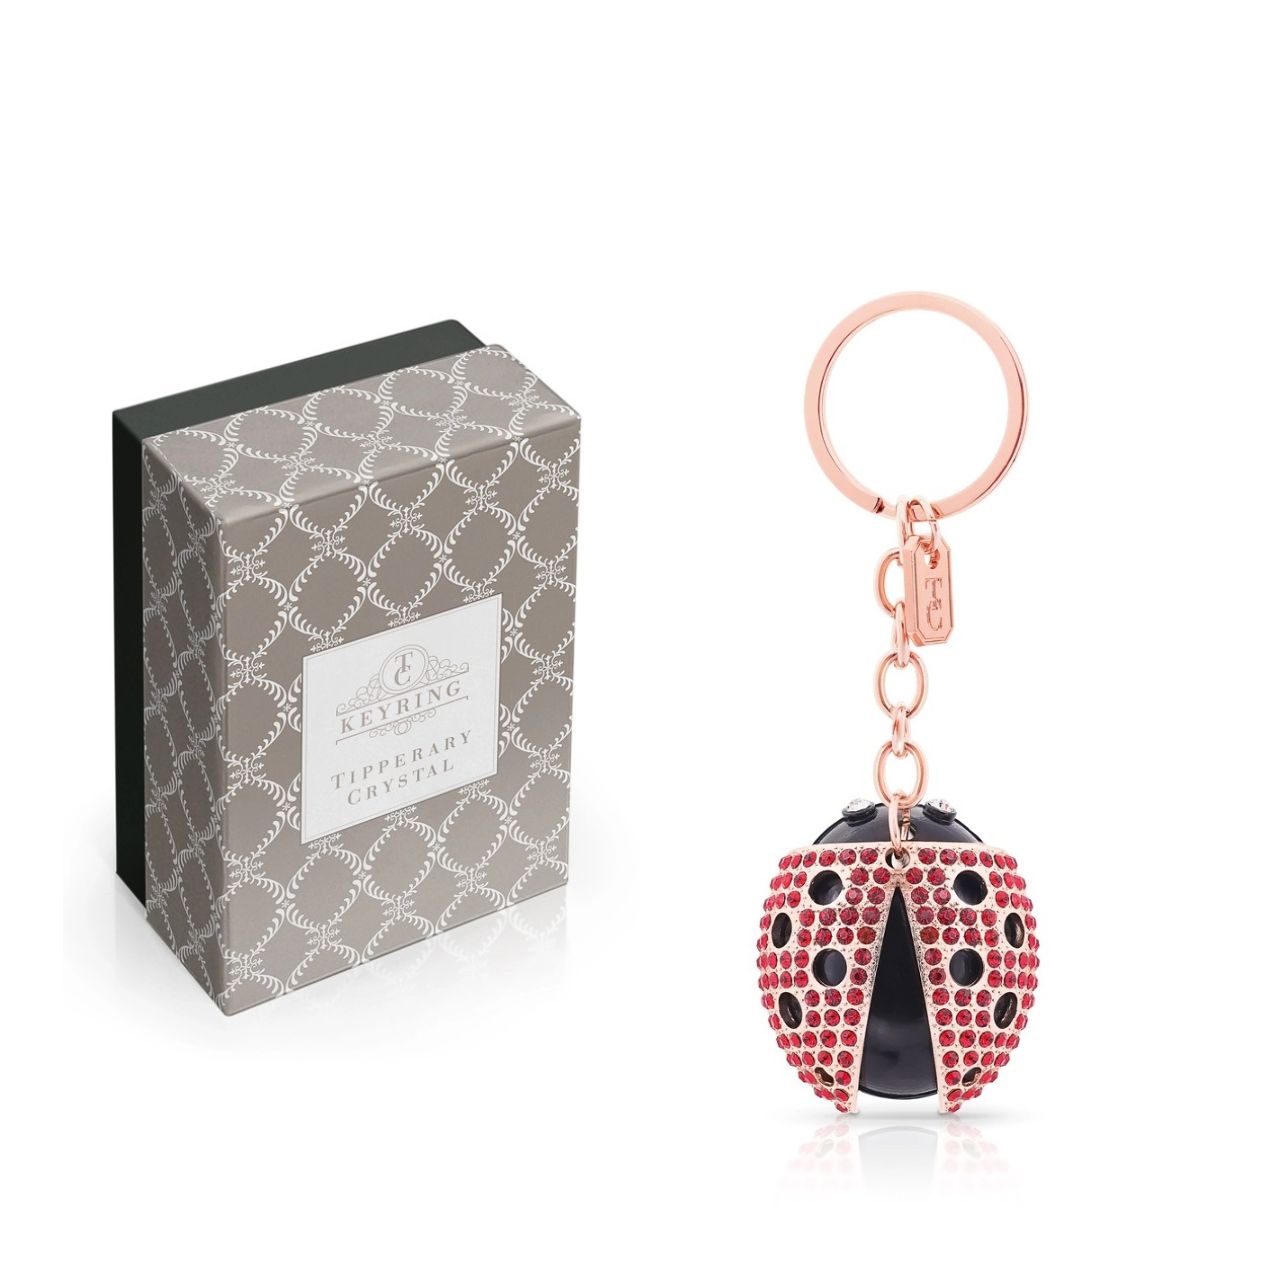 Tipperary Crystal Ladybird Keyring  Transform your keys to a fashion statement with this cute red ladybird on the end of a keyring.